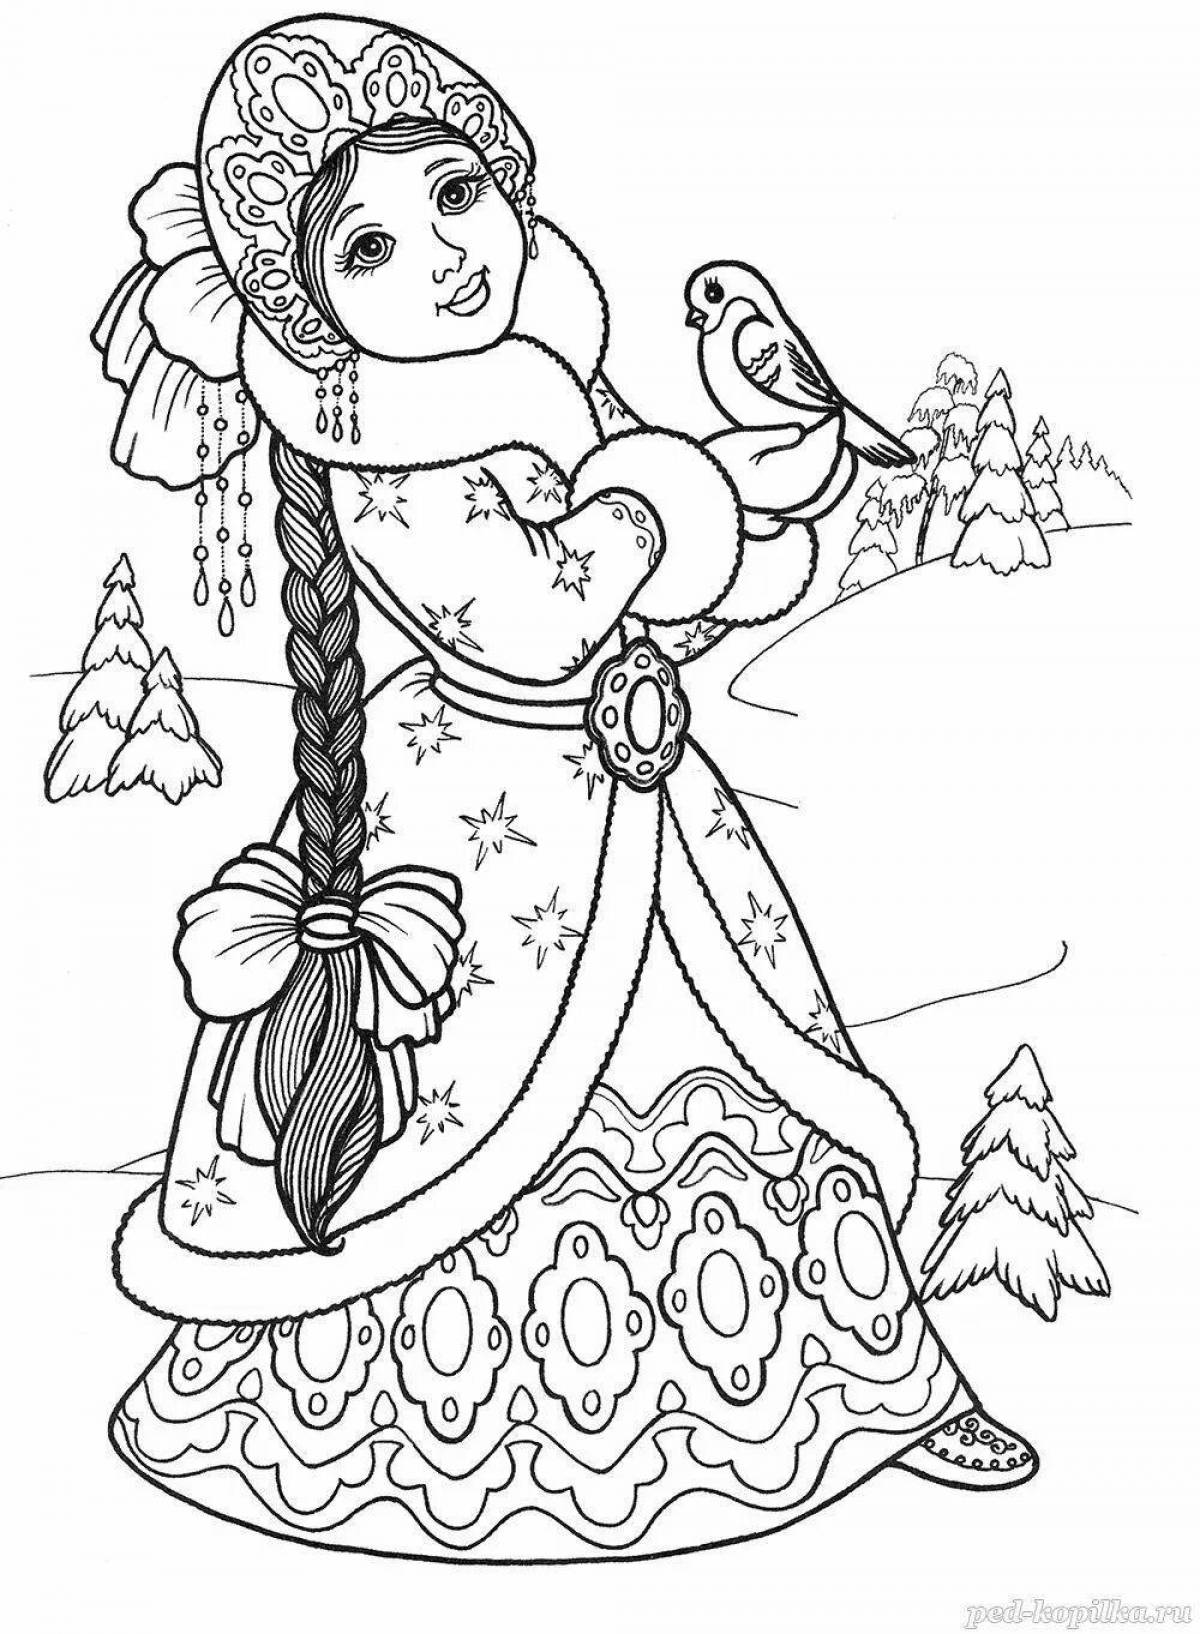 Coloring the face of a graceful snow maiden